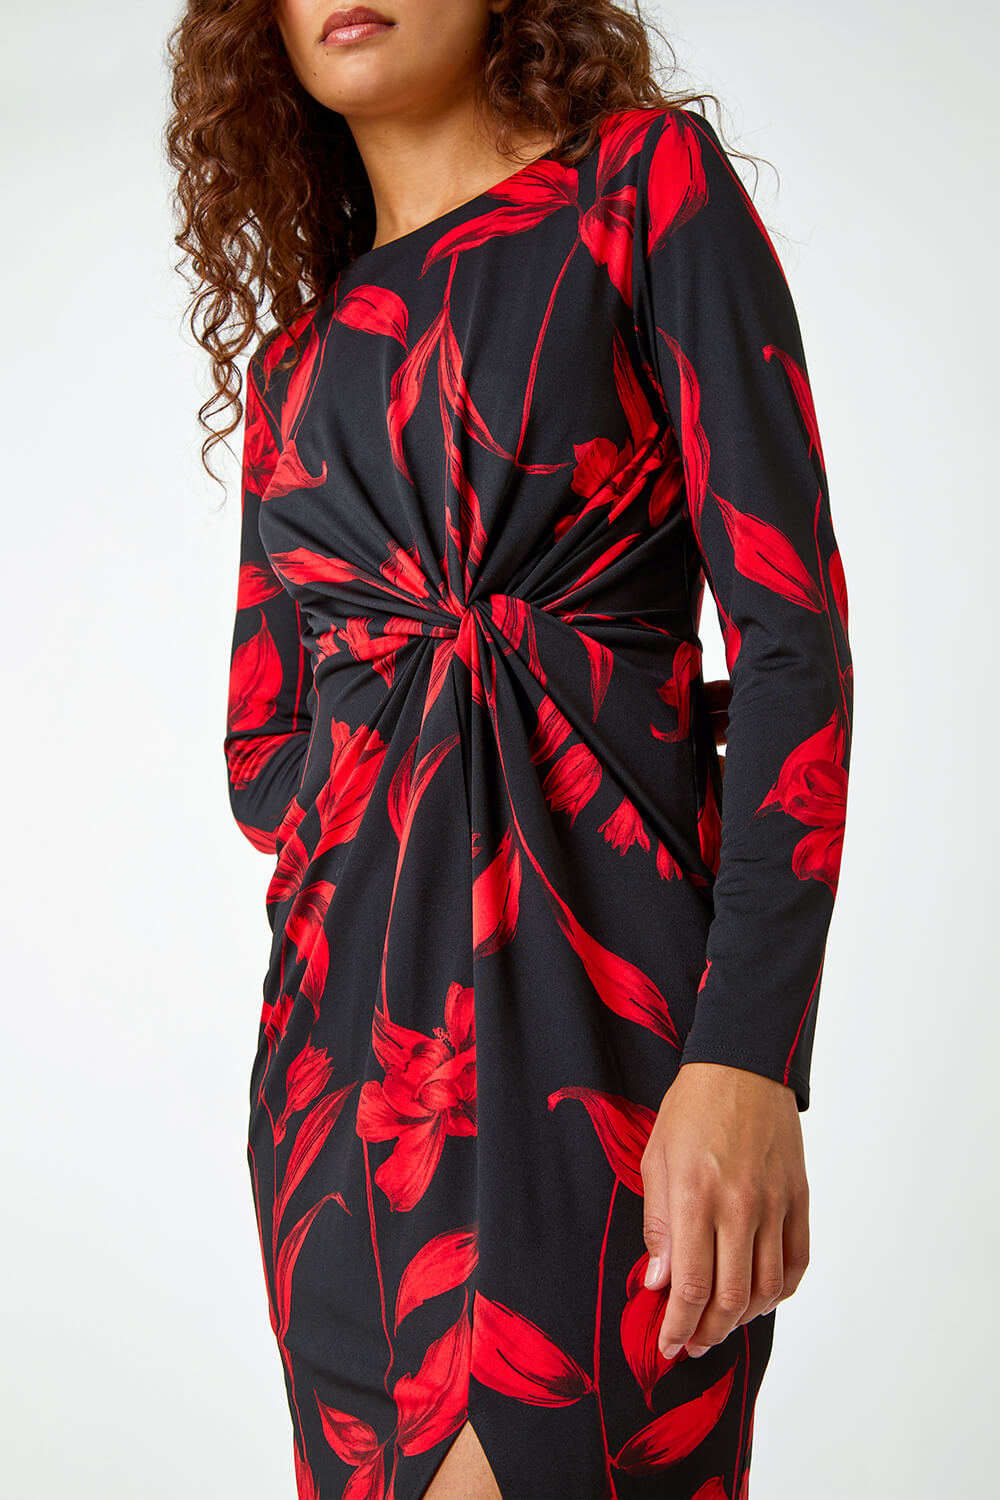 Red Floral Print Twist Detail Stretch Dress, Image 5 of 5